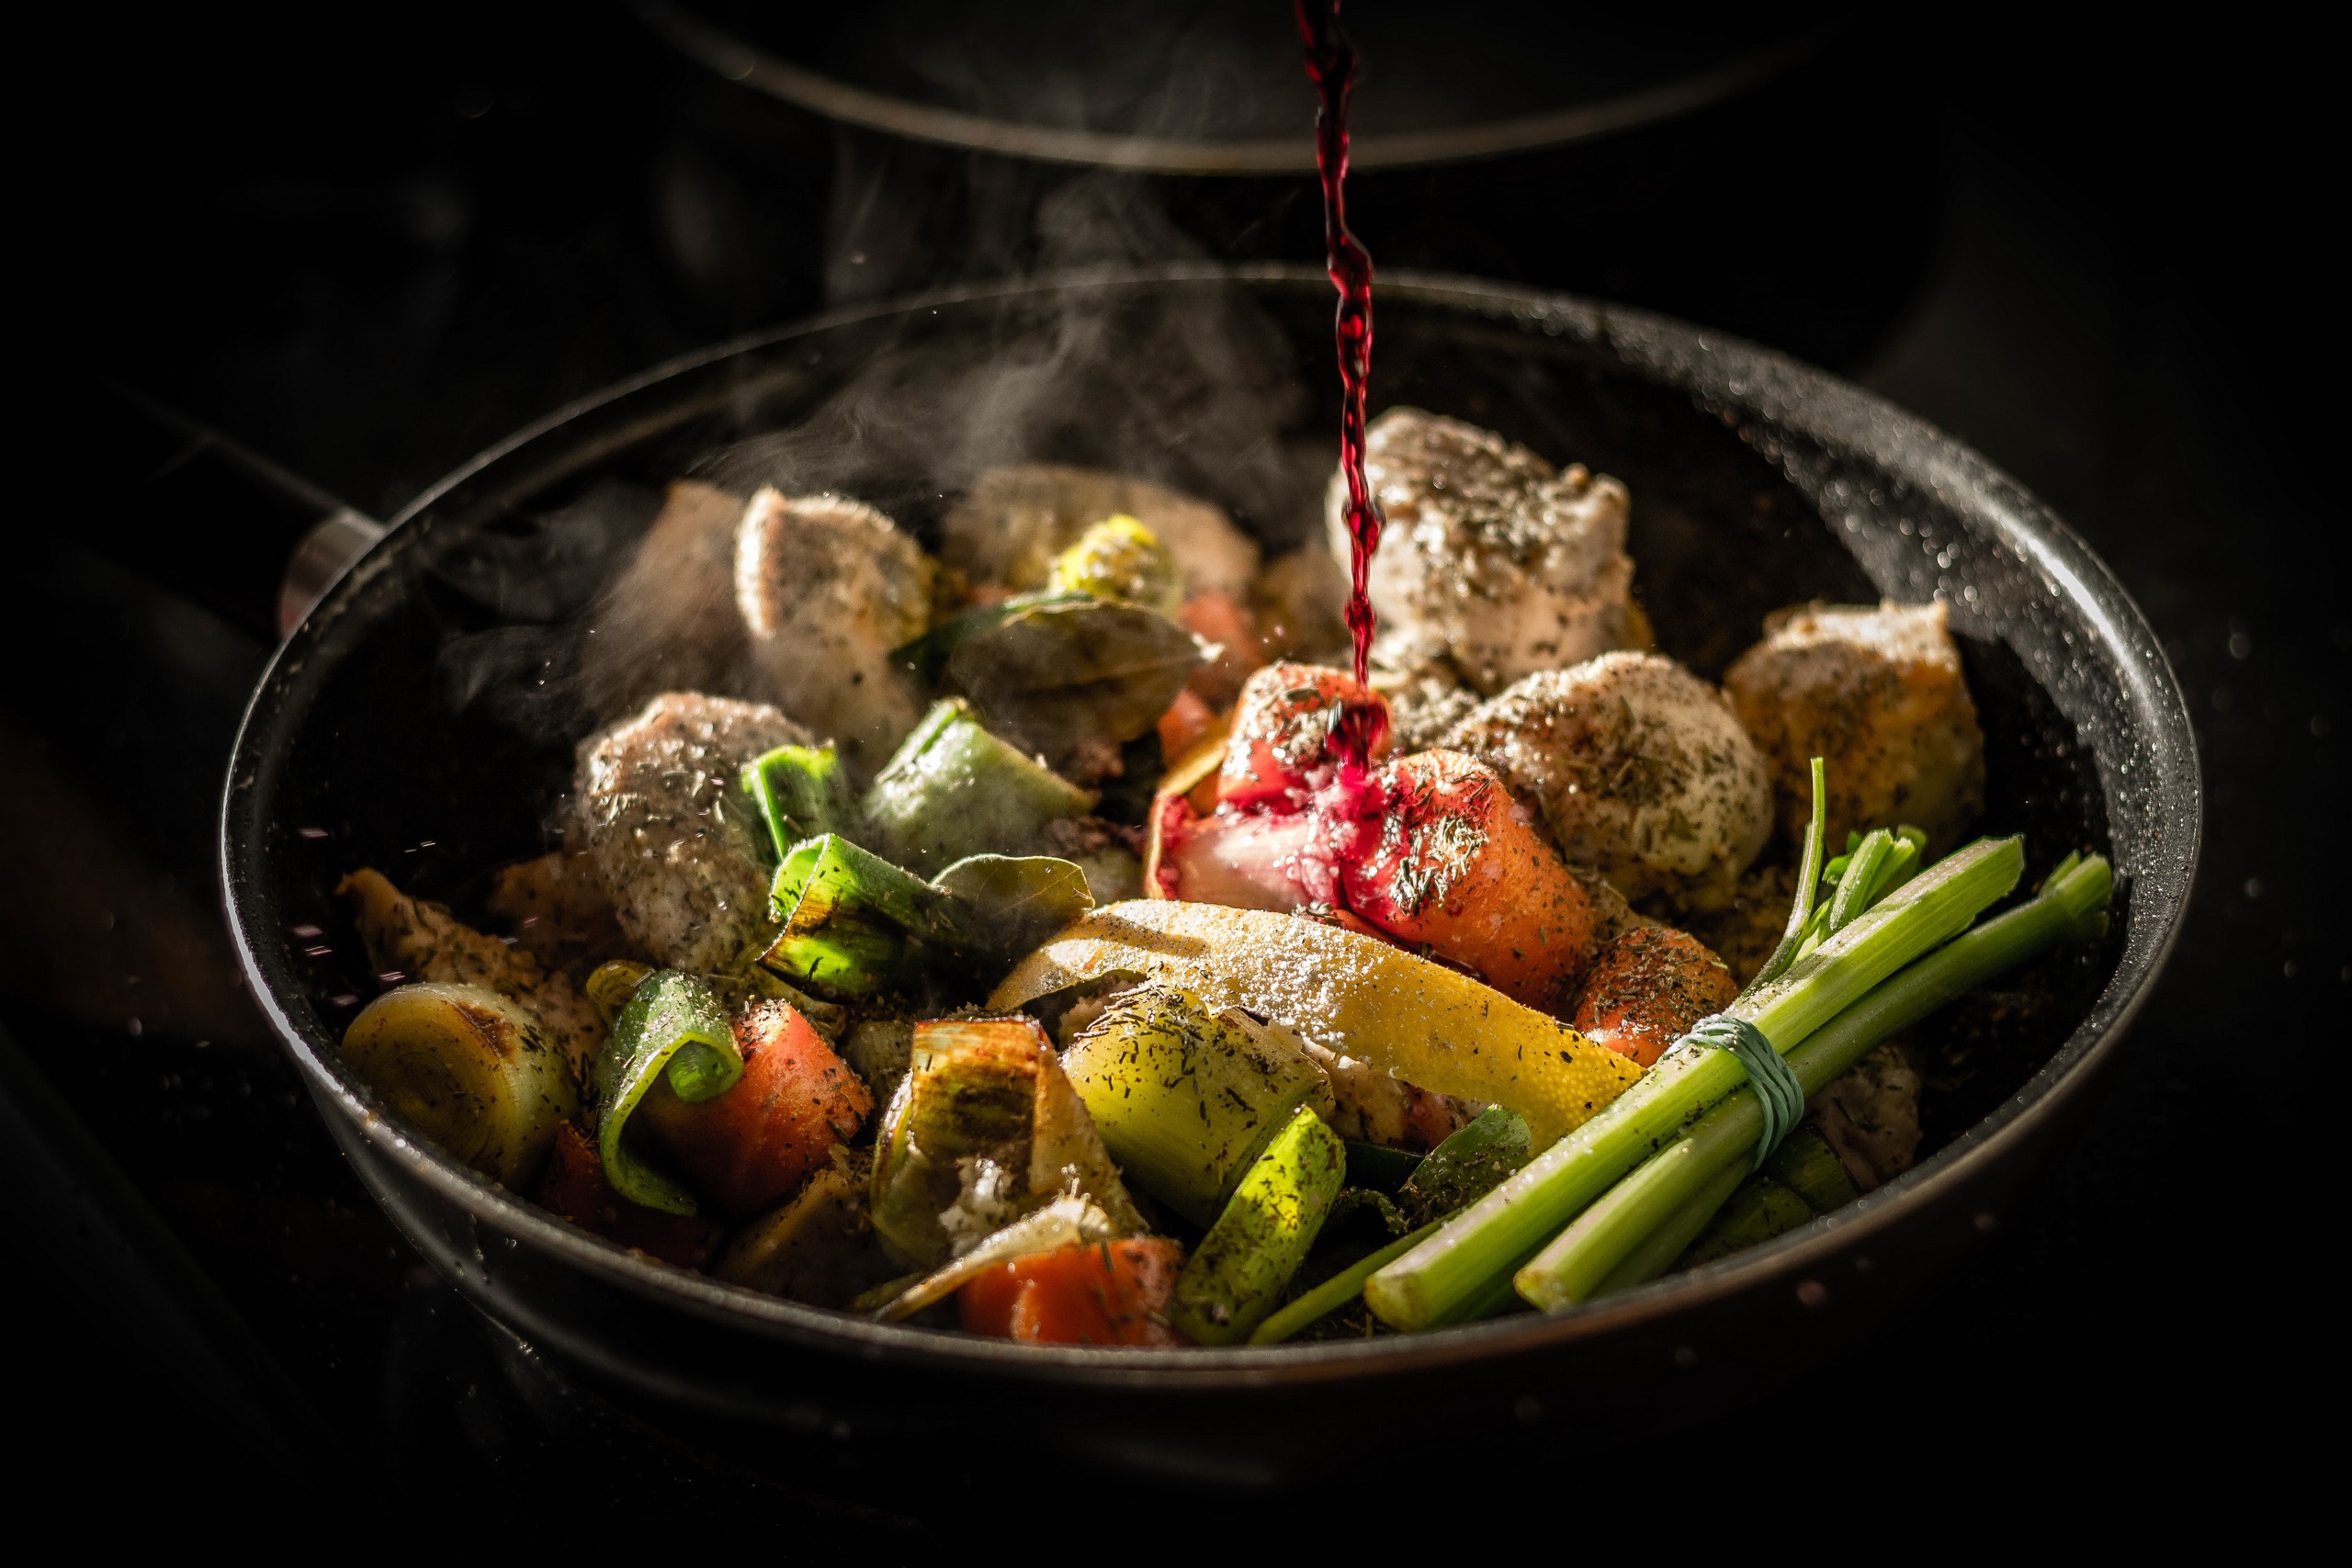 General 2560x1707 food vegetables colorful red wine cooking closeup